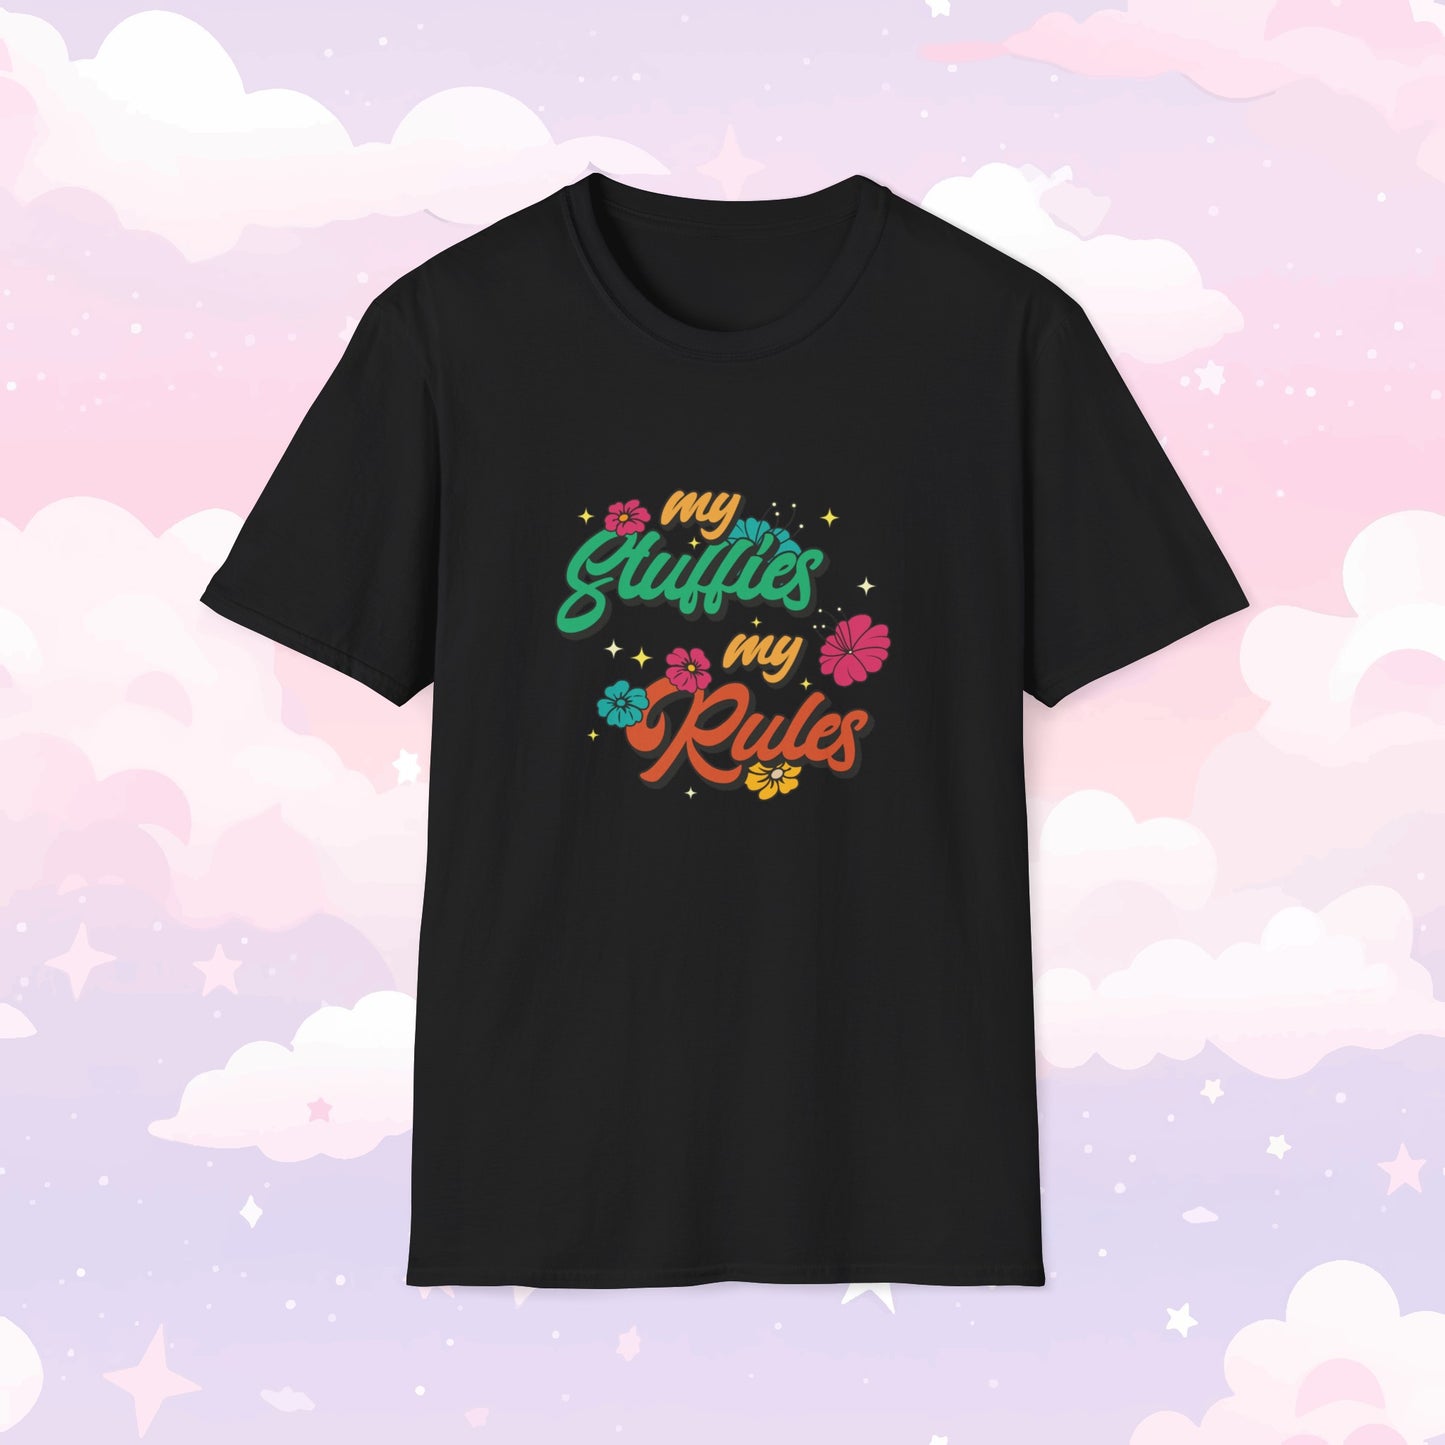 My Stuffies, My Rules - Adult Little Space Shirt